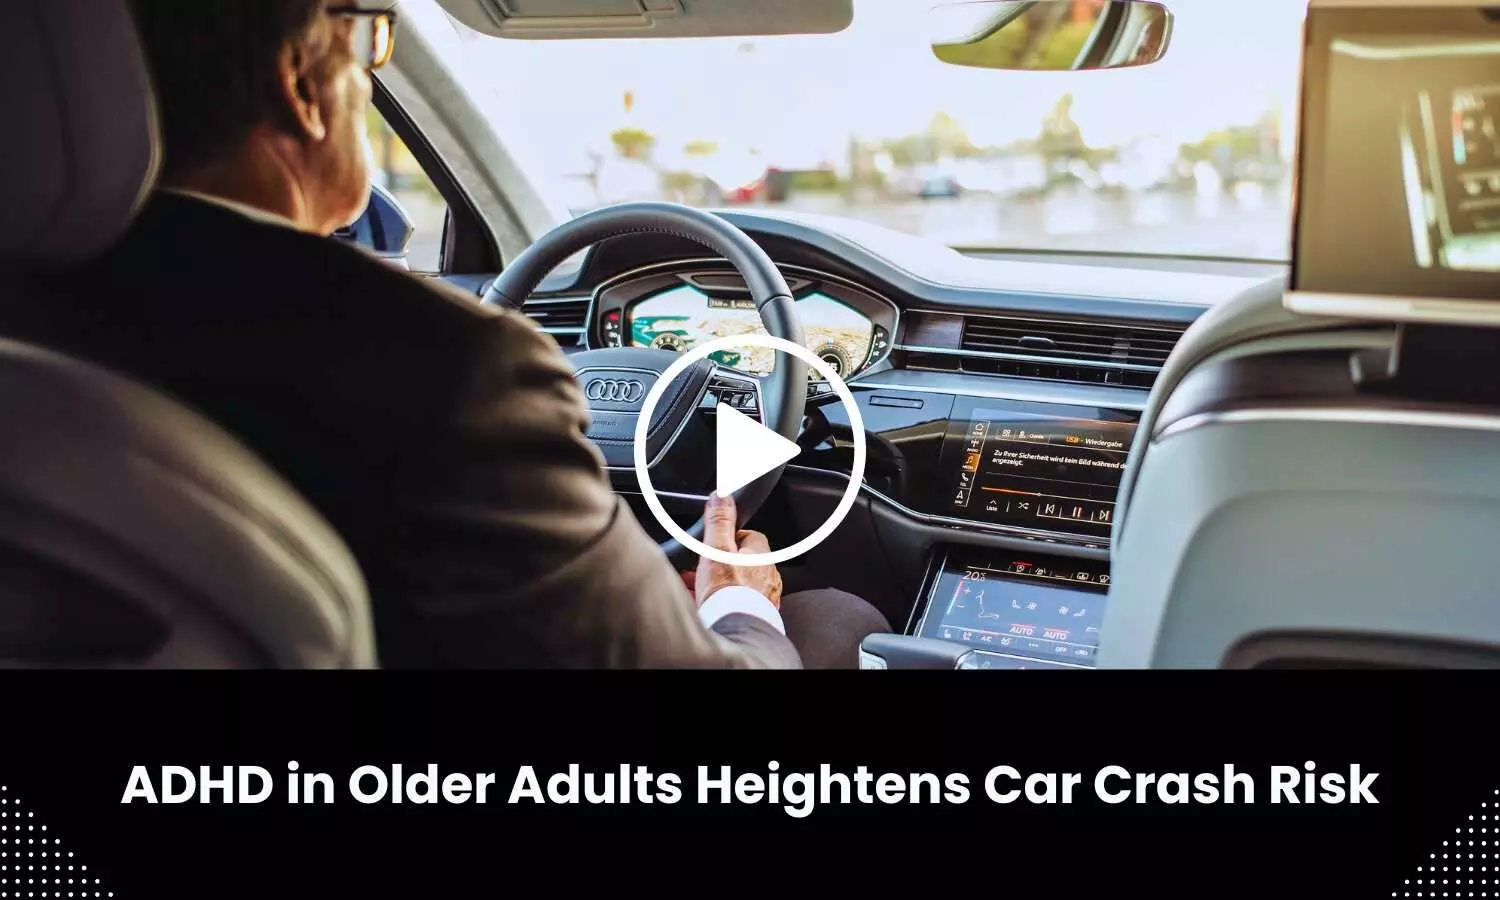 ADHD in older adults heightens car crash risk